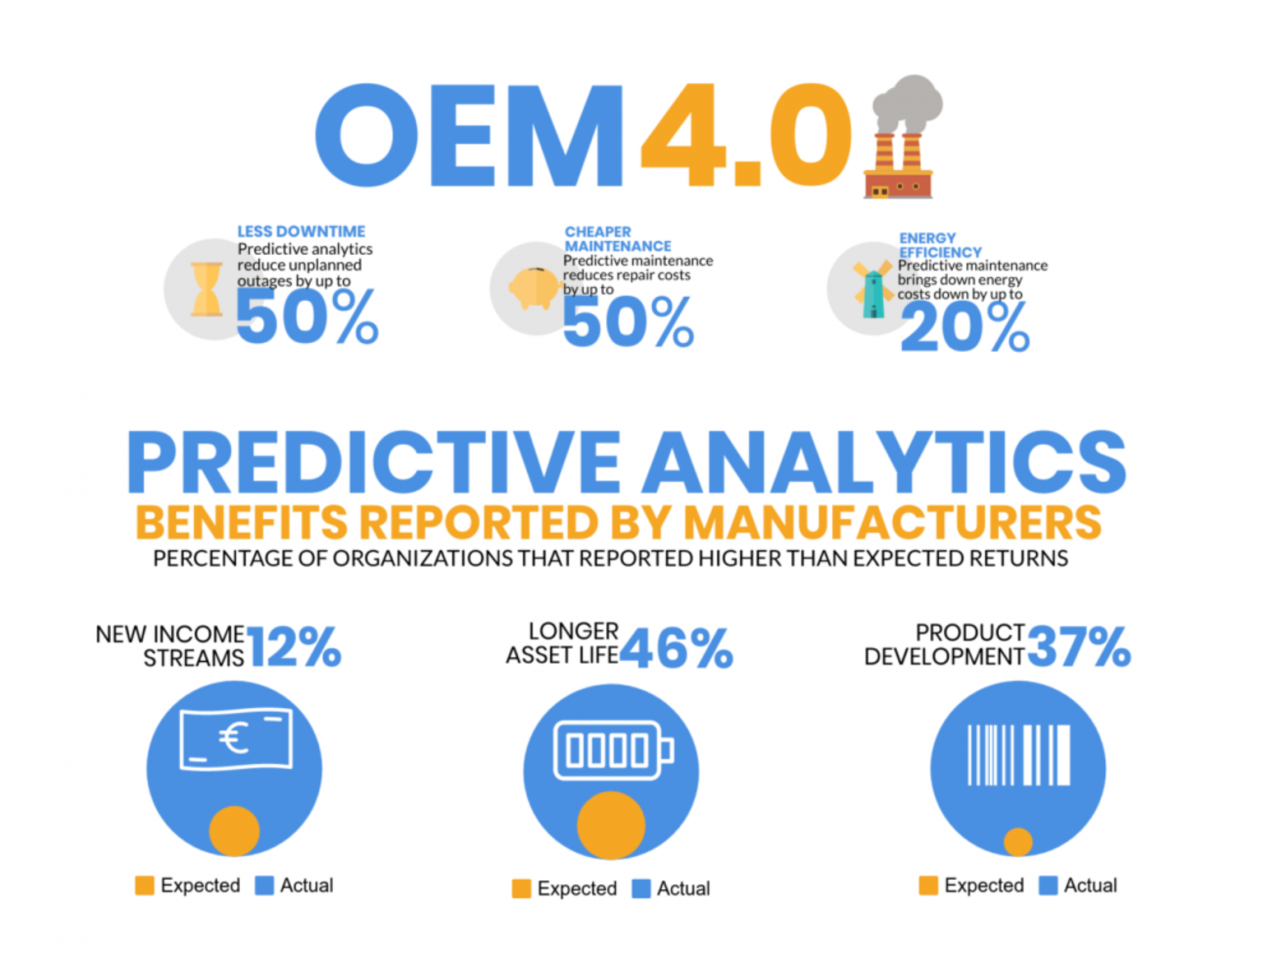 OEM 4.0 Predictive analytics, the benefits reported by manufacturers